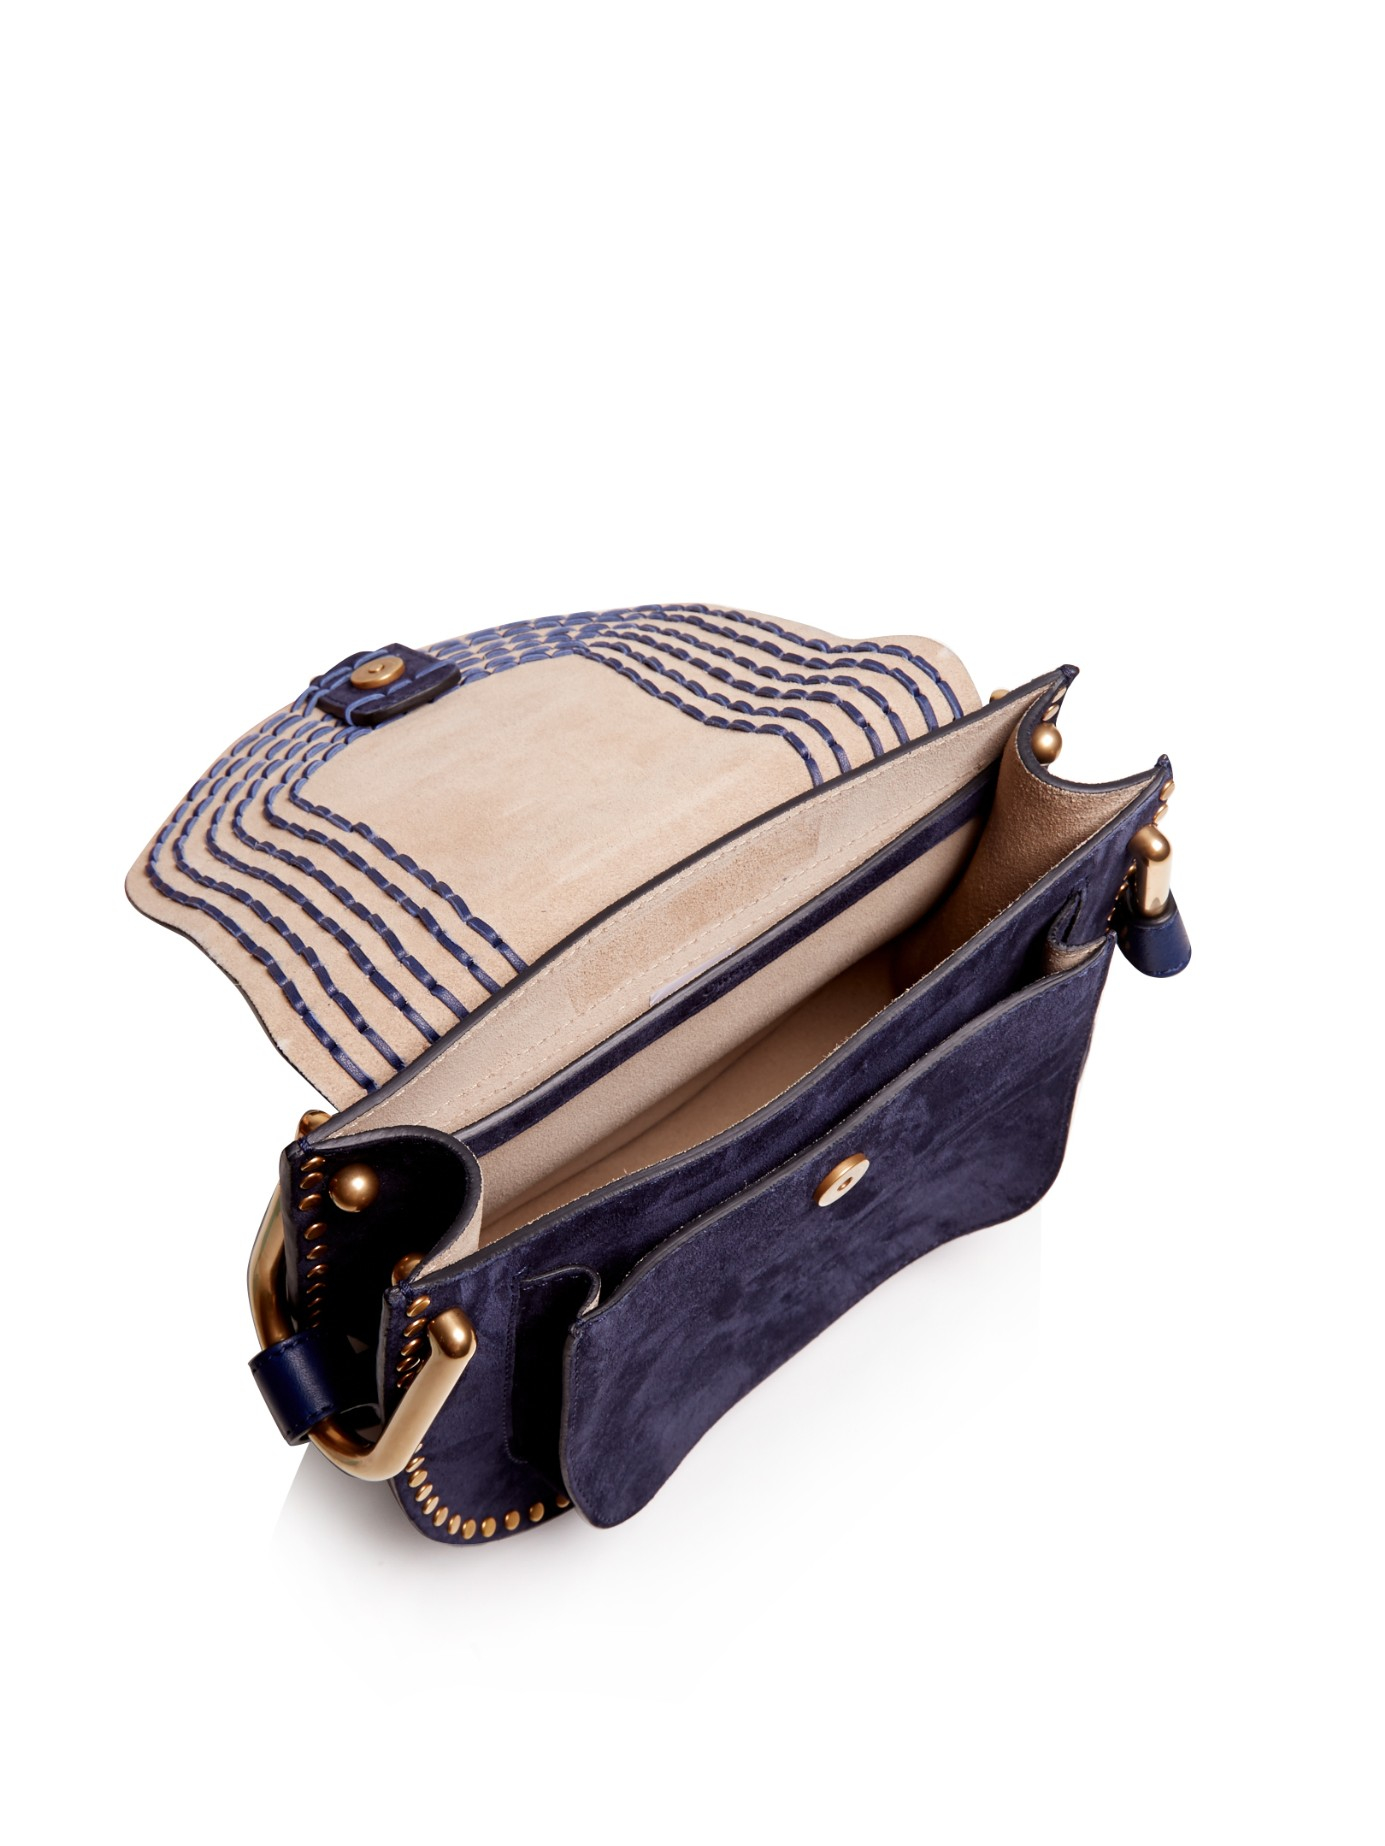 Chlo Hudson Small Suede Cross-body Bag in Blue (NAVY) | Lyst